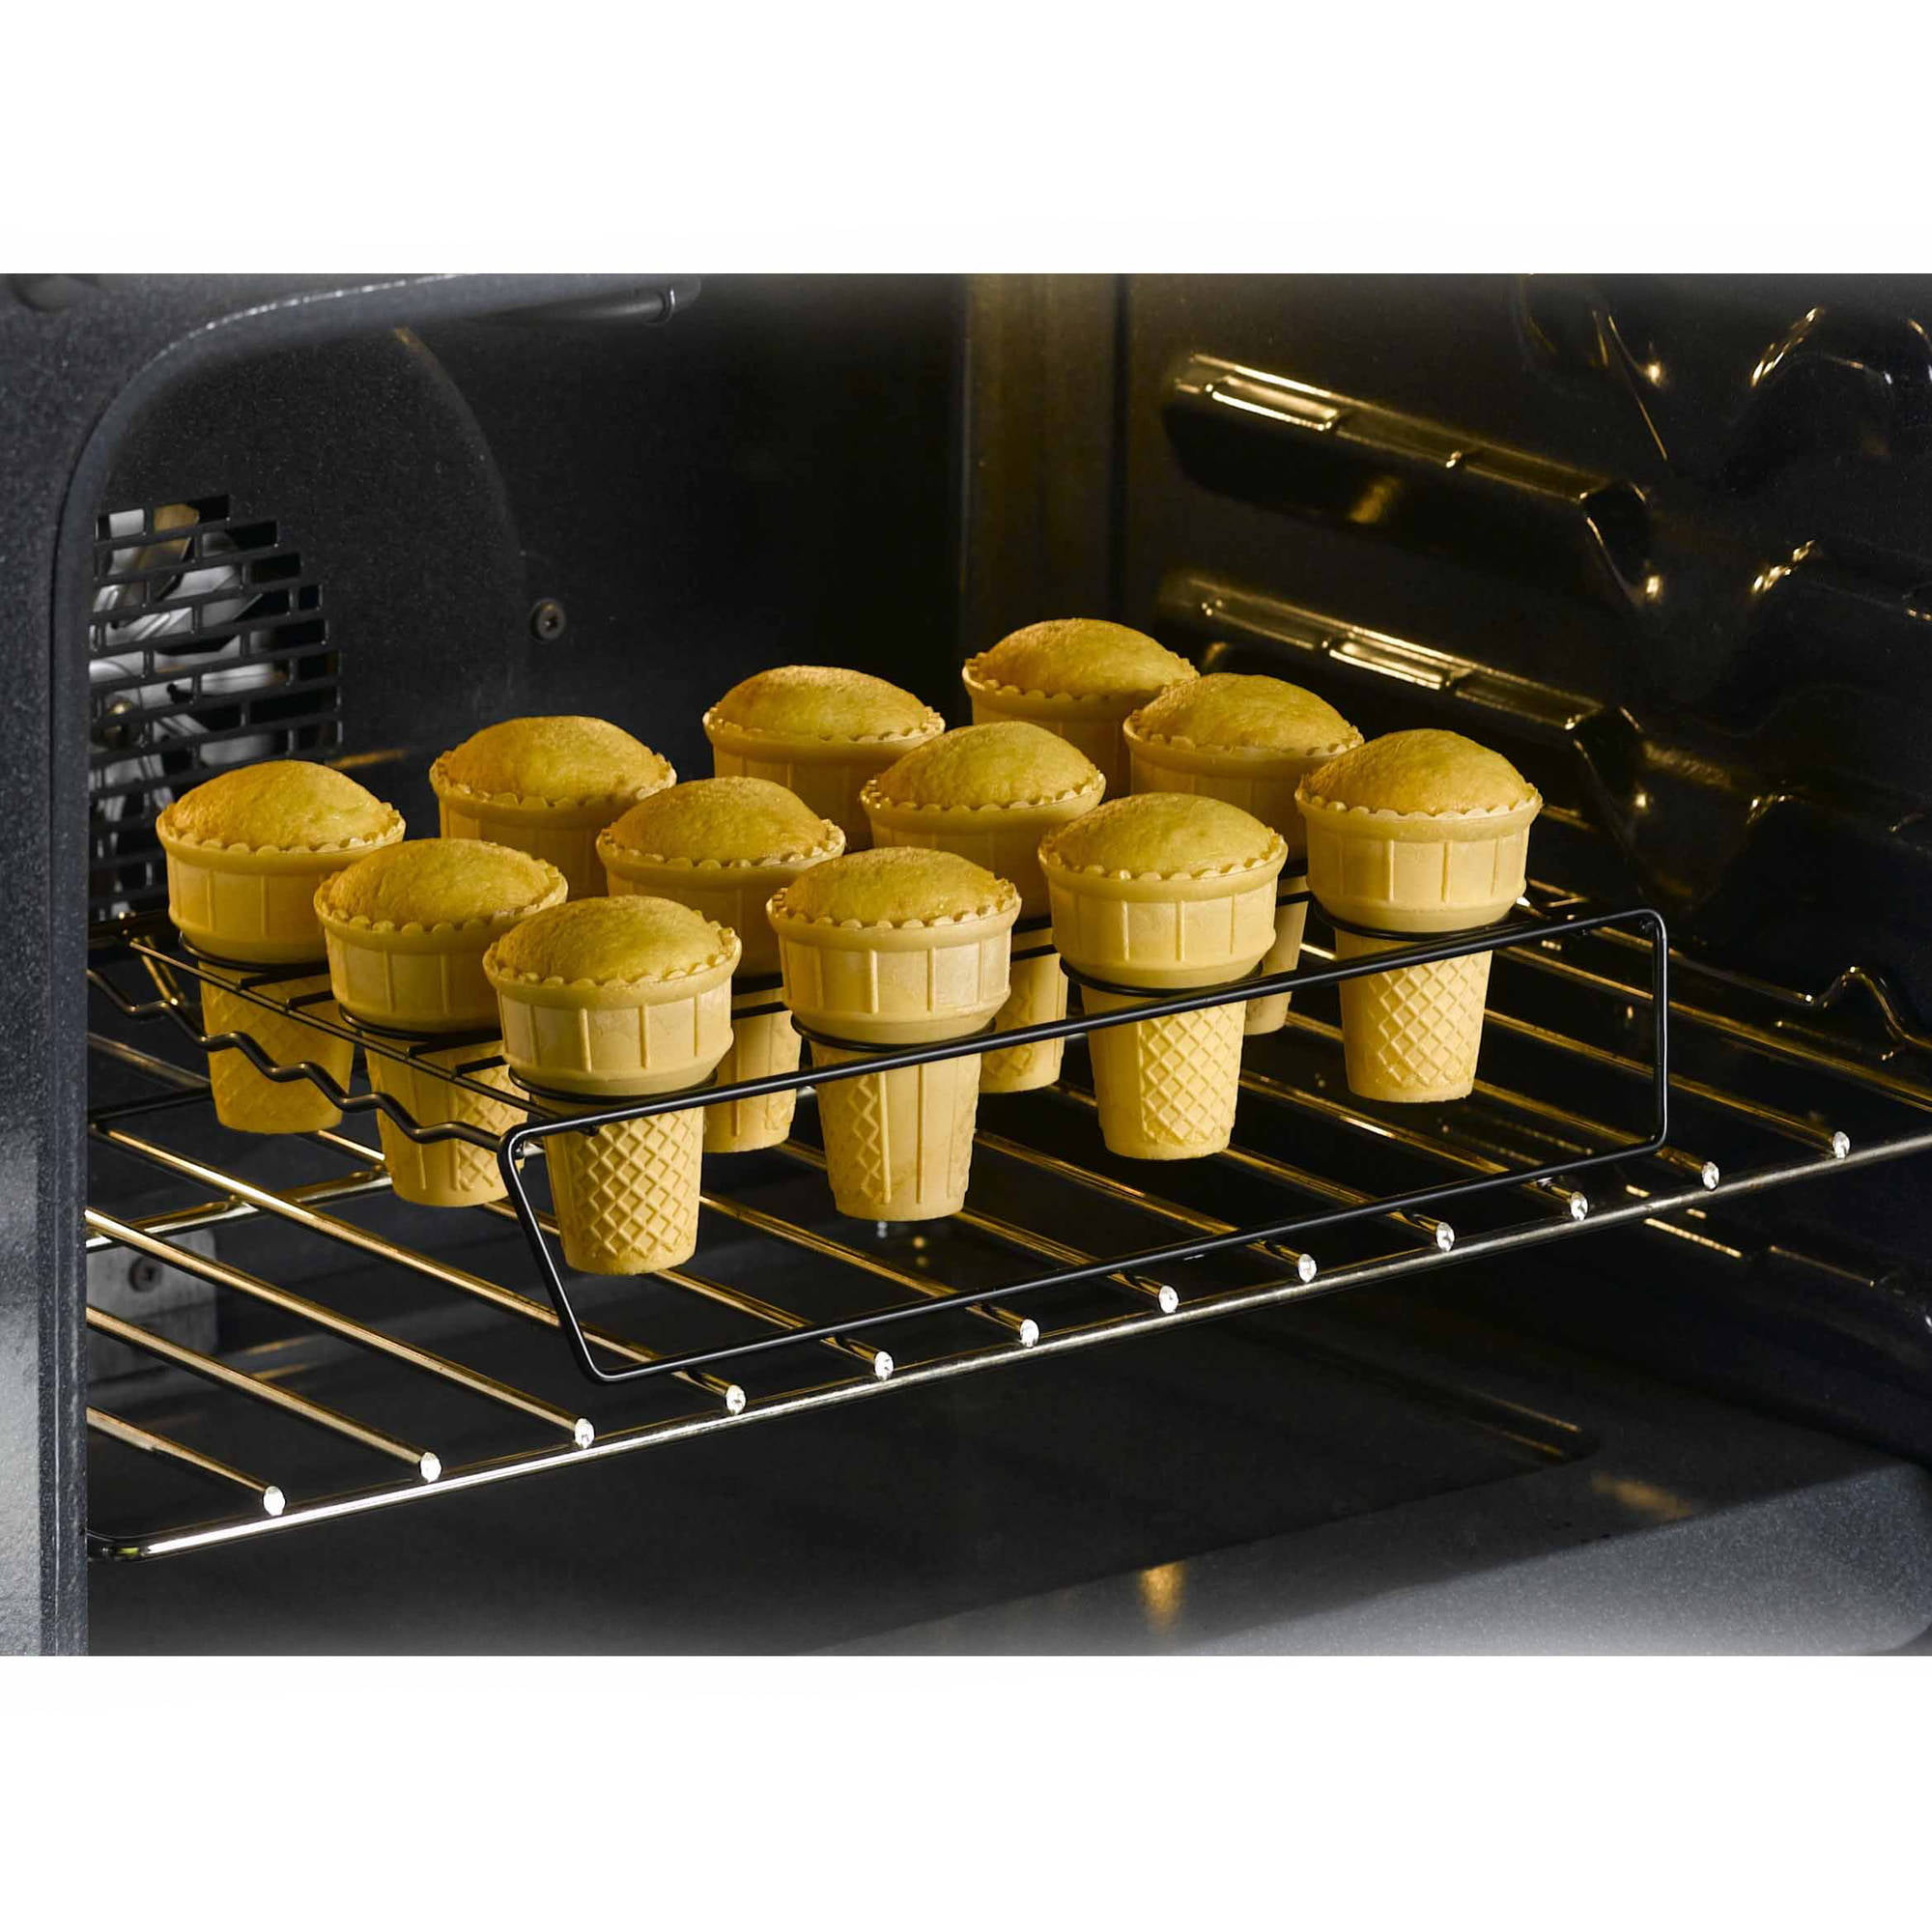 All in 1 Oven Crisper Baking Pan and Cooling Rack – Nifty Home